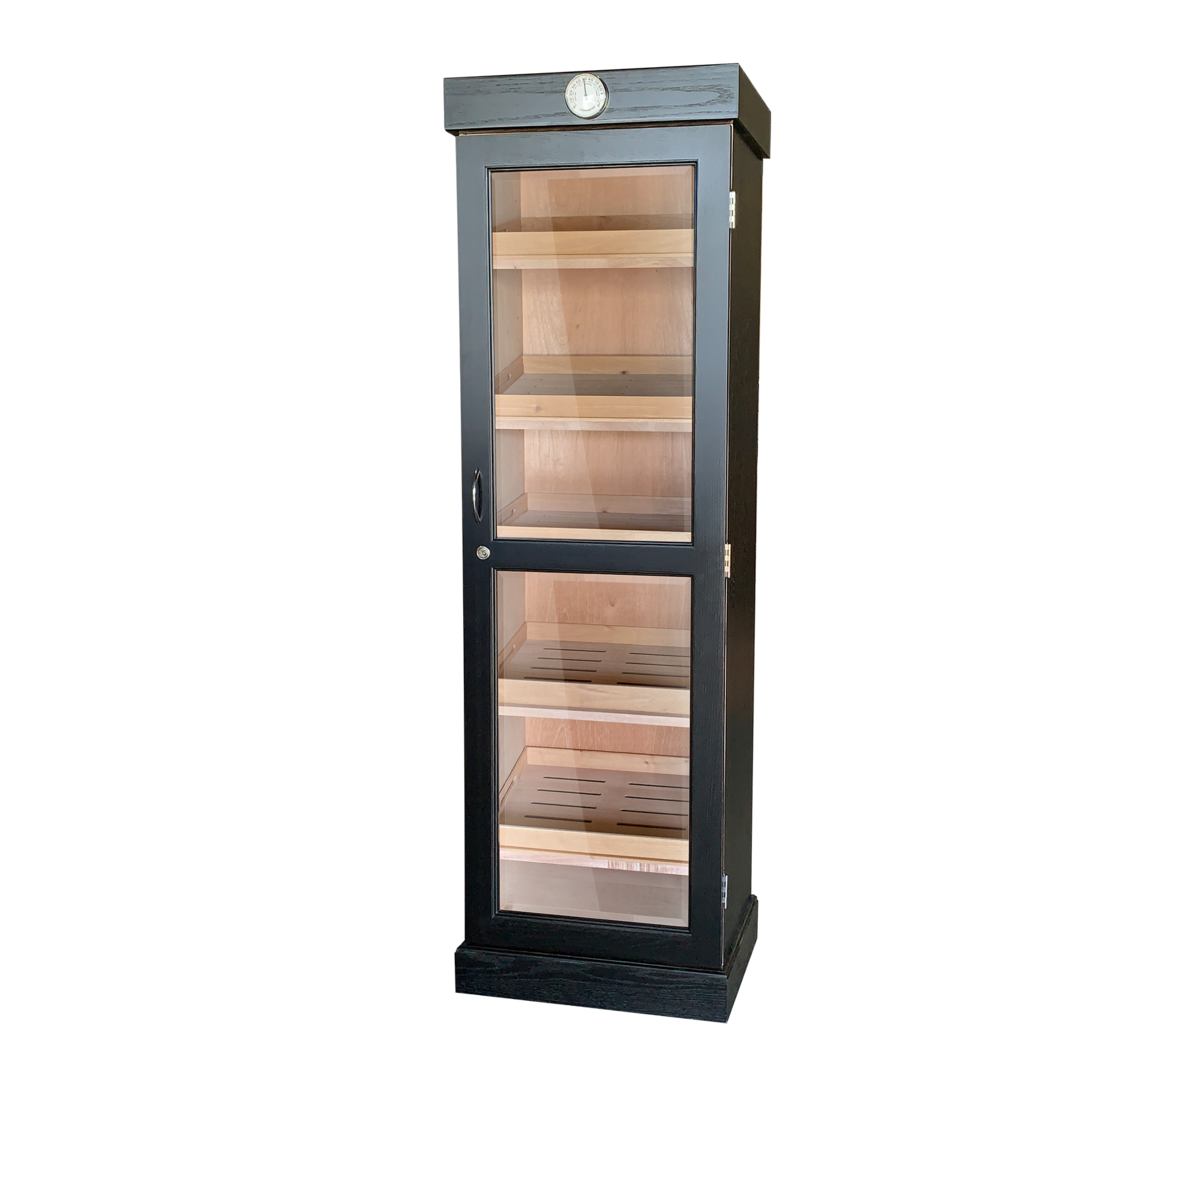 Quality Importers Cigar Tower Display Unit in Ebony